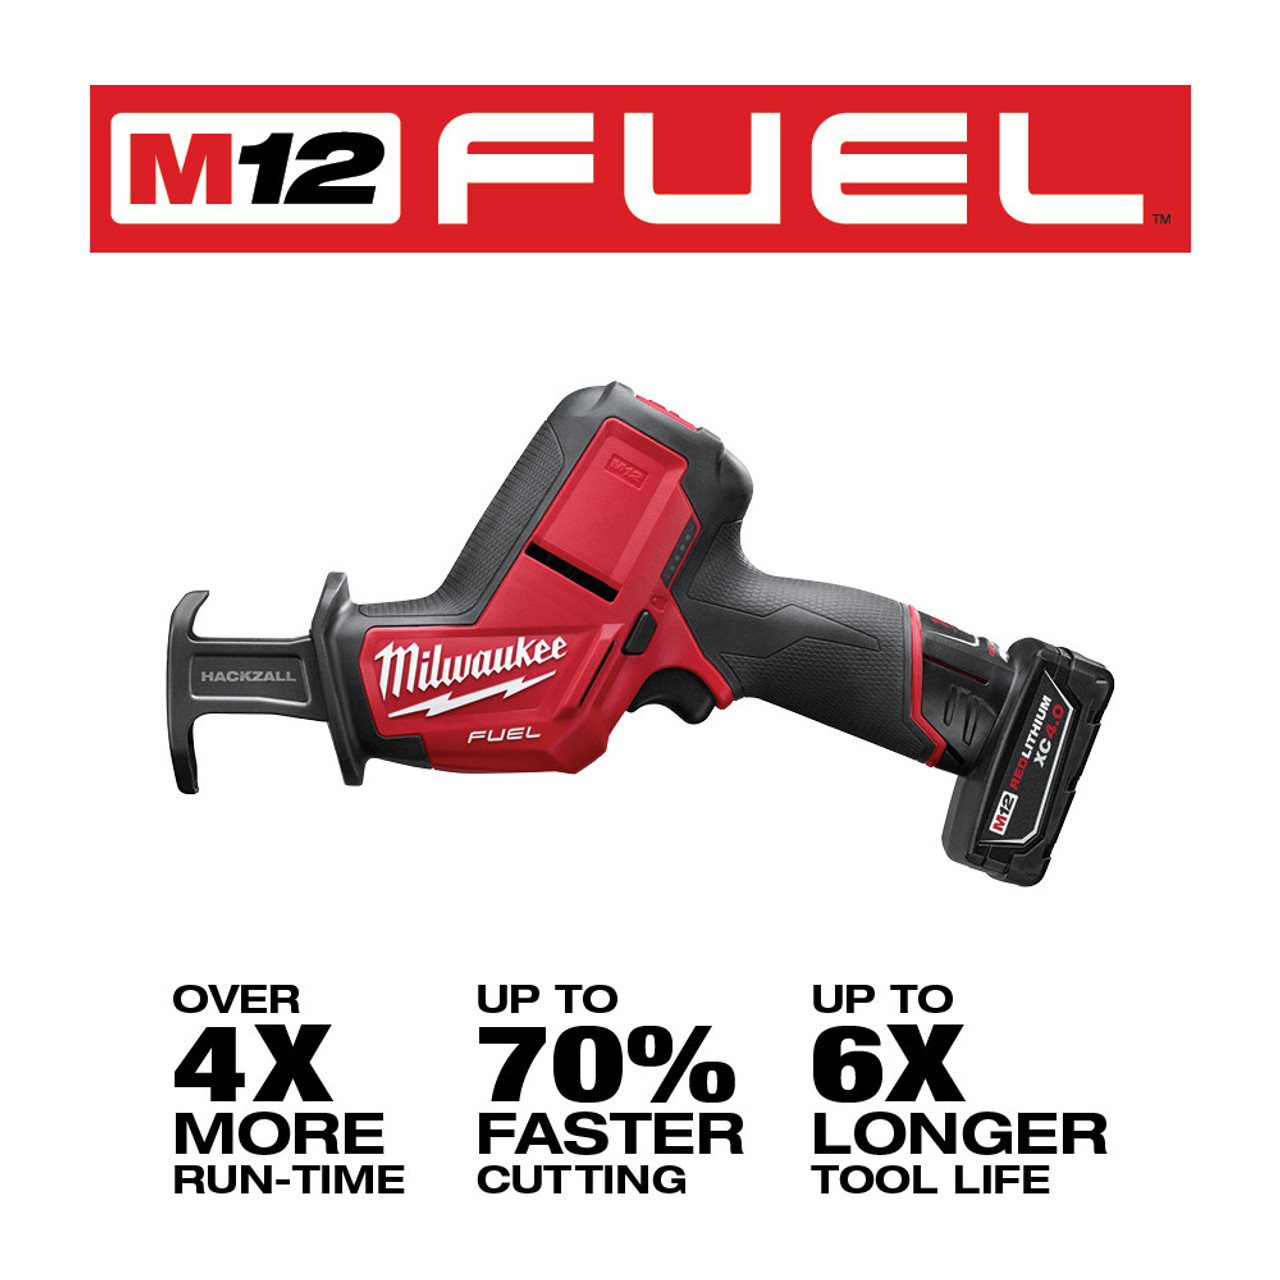 M12 FUEL 12 Volt Lithium-Ion Brushless Cordless HACKZALL Reciprocating Saw  Kit